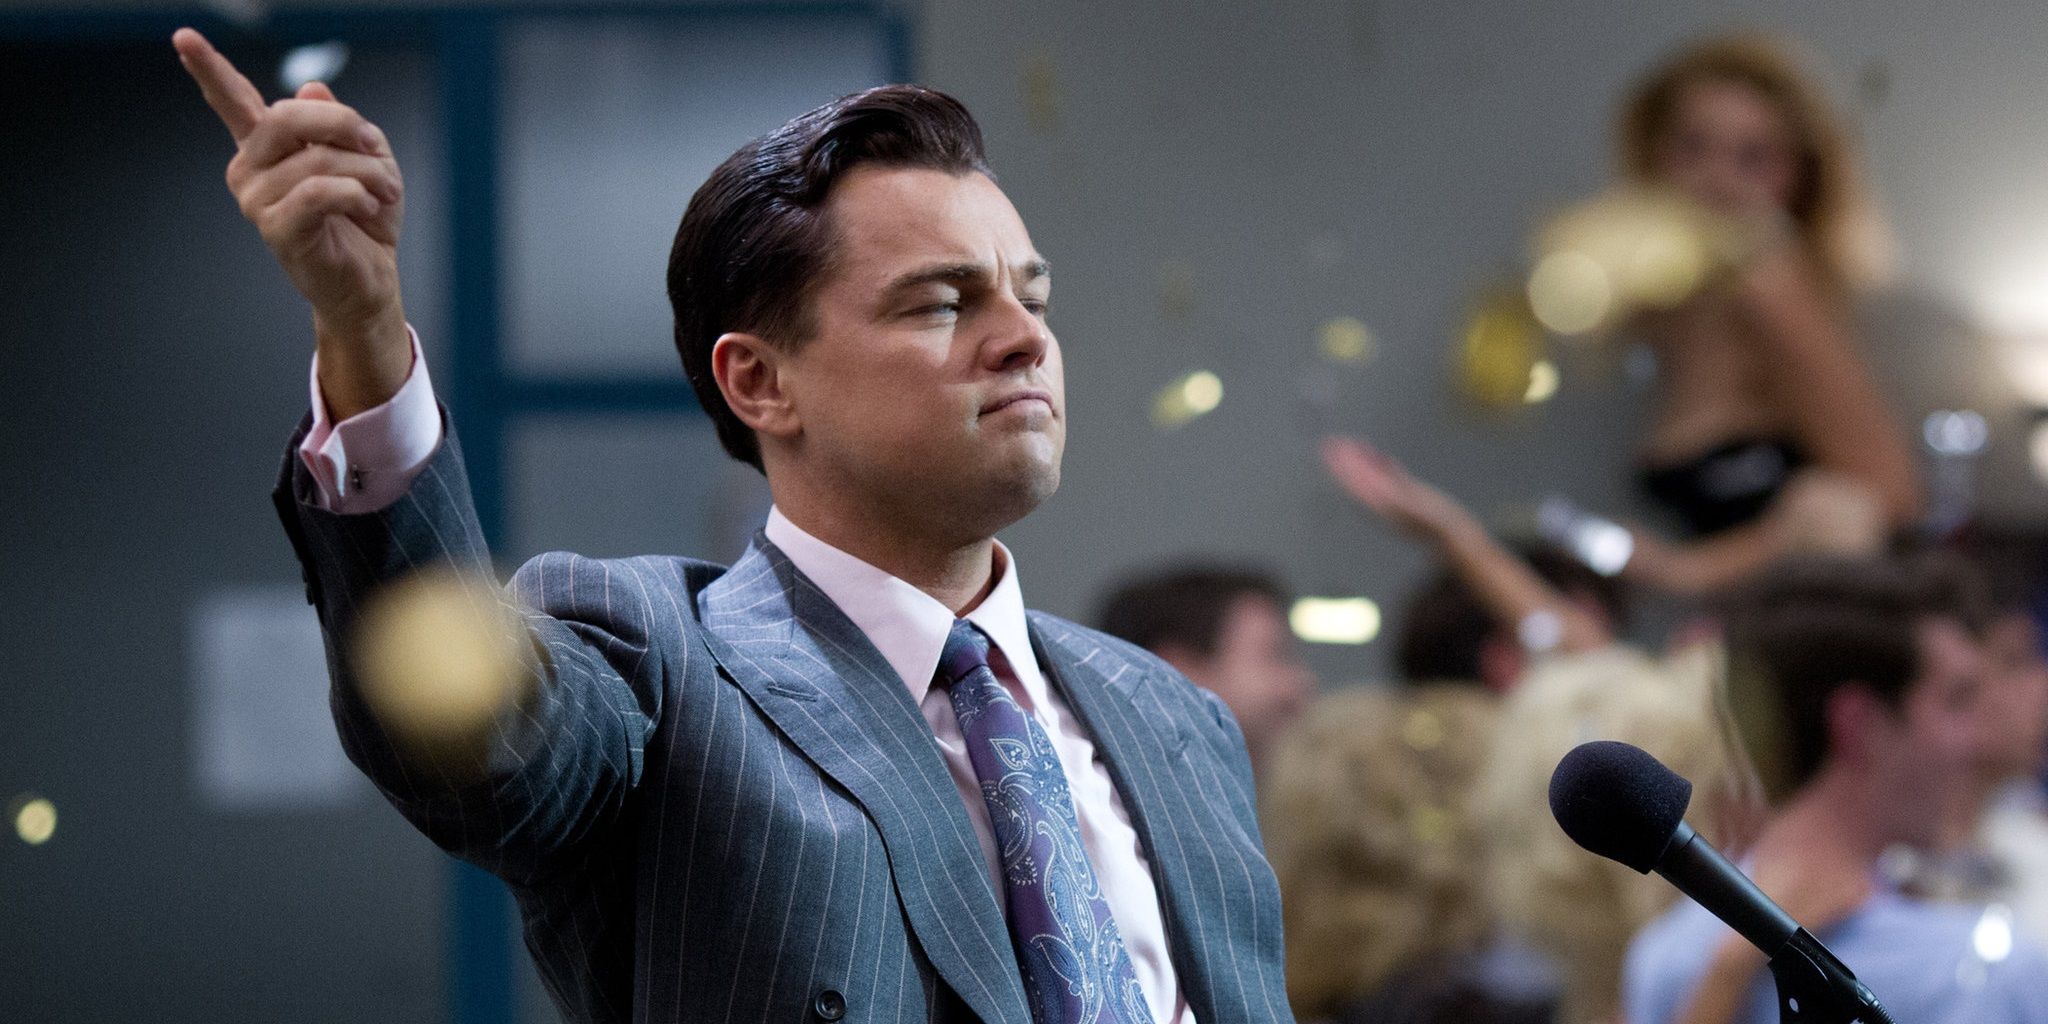 Leonardo DiCaprio speaking to his employees in The Wolf of Wall Street